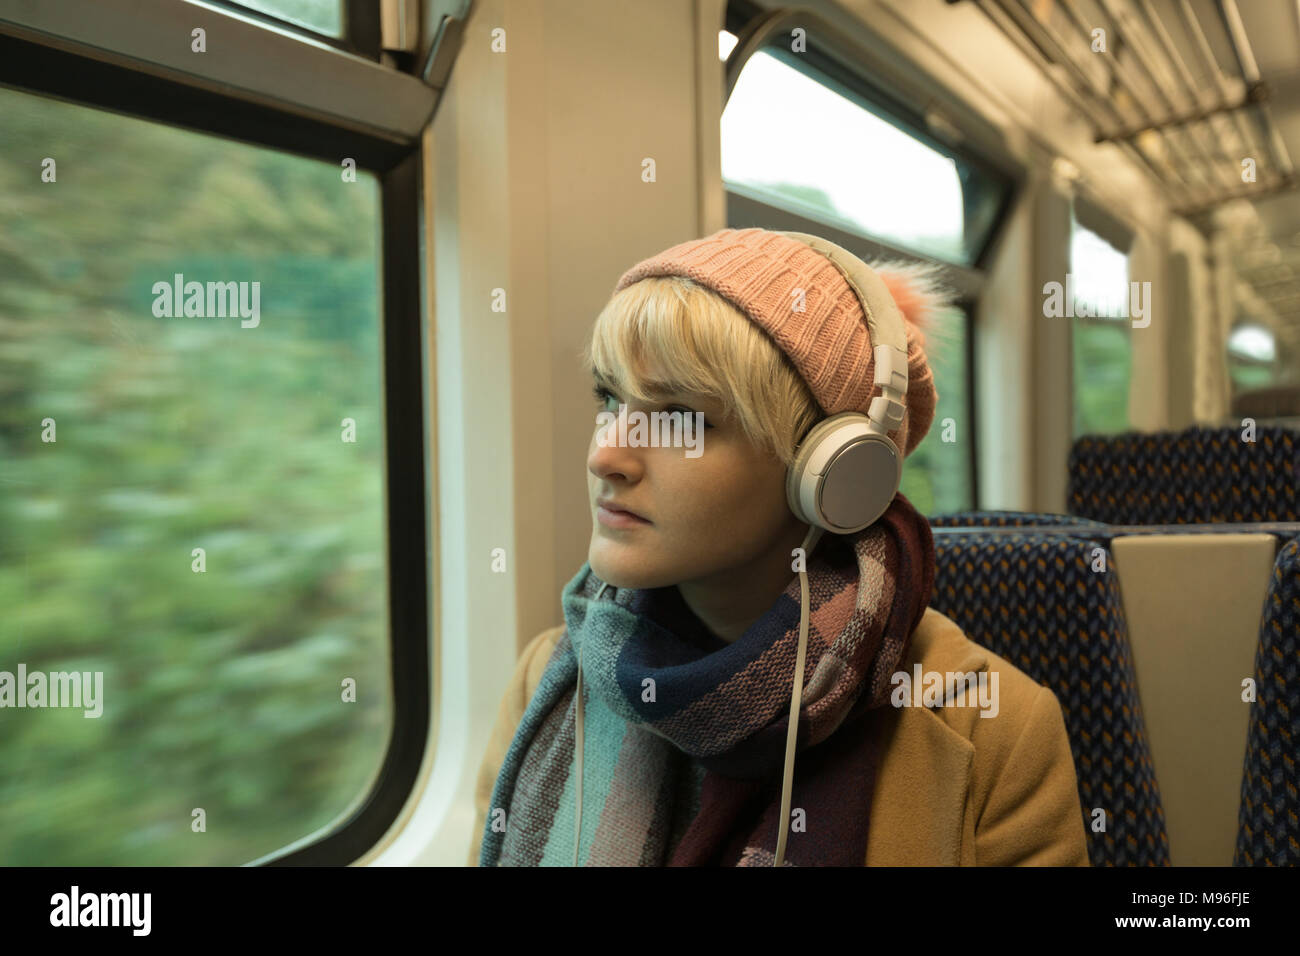 Young woman in warm clothing listing to music on headphones Stock Photo